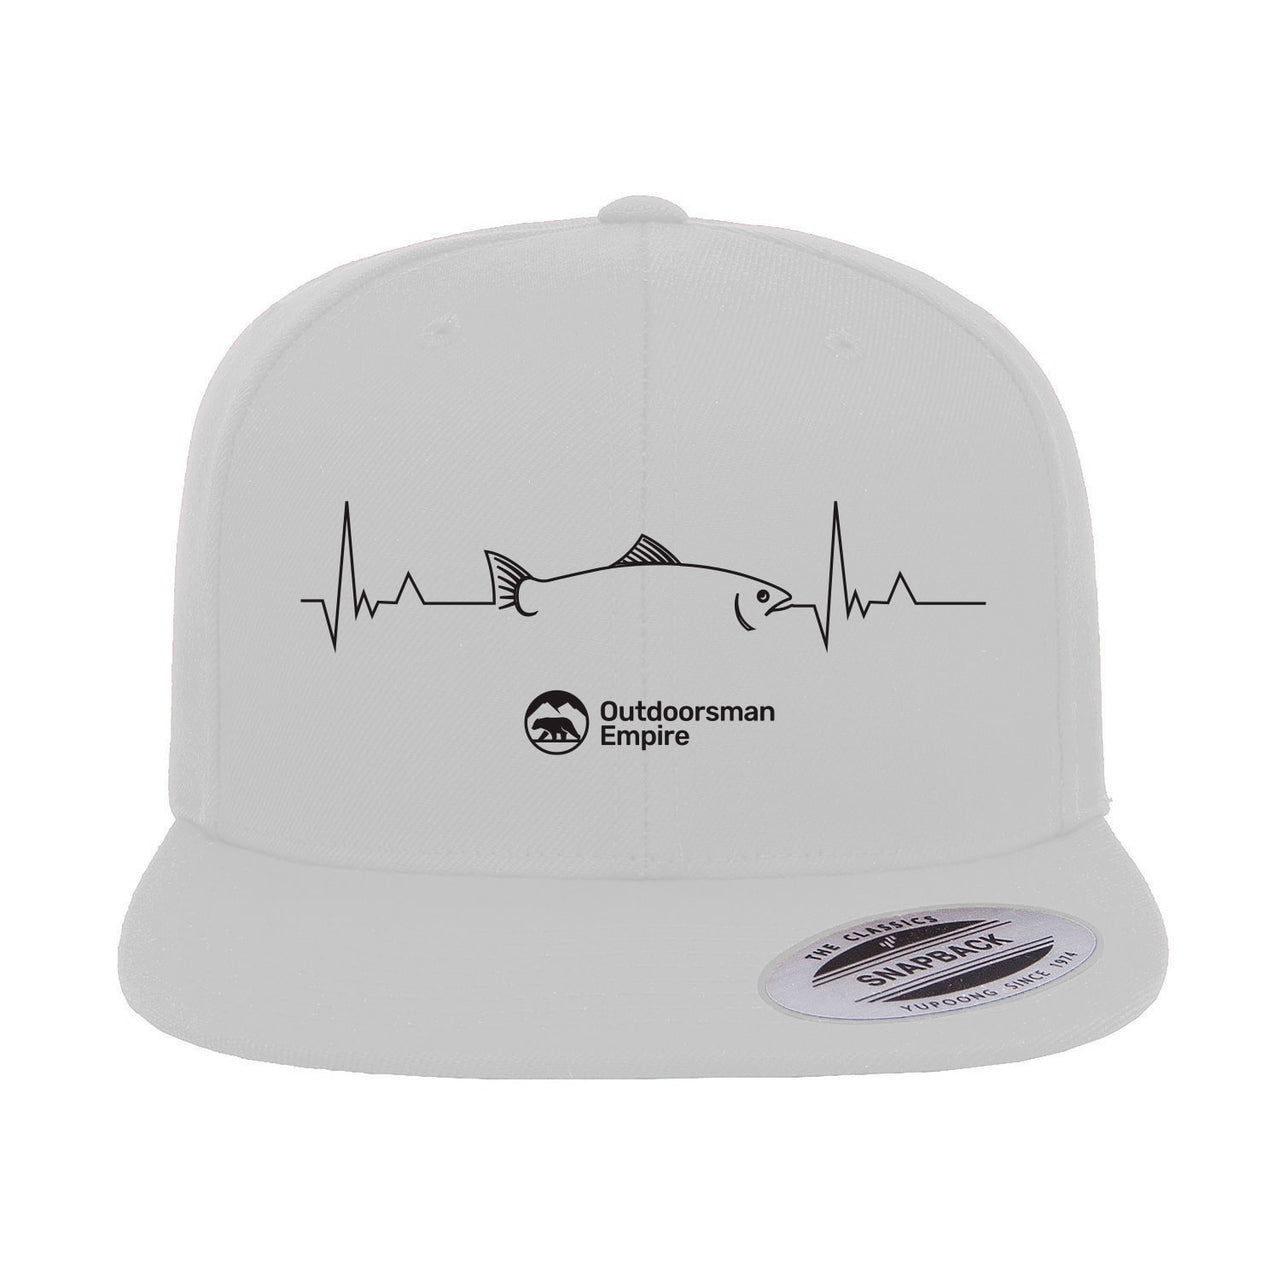 Fishing Cardiogram Embroidered Flat Bill Cap